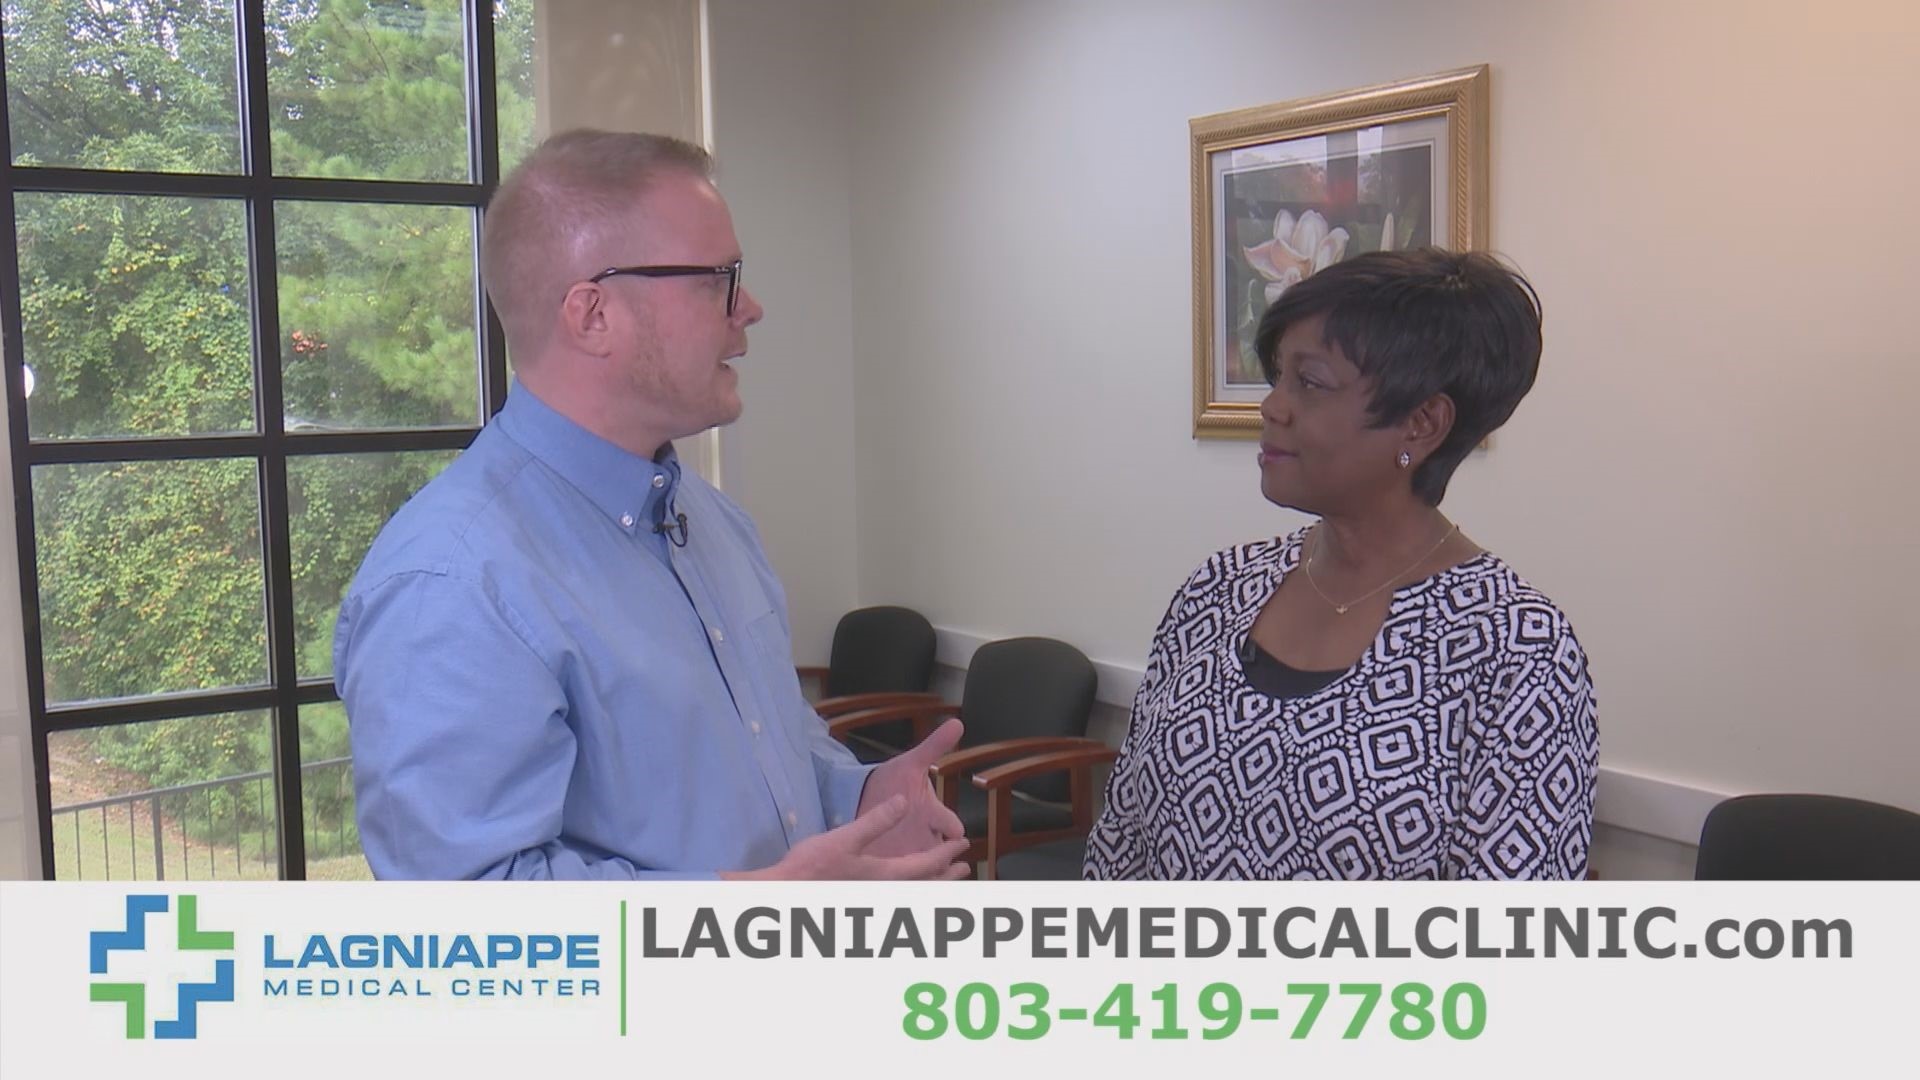 Lagniappe Medical Clinic provides Behavioral and Mental Health services for diagnoses that can range from depression and anxiety to bi-polar disorder or schizophrenia.